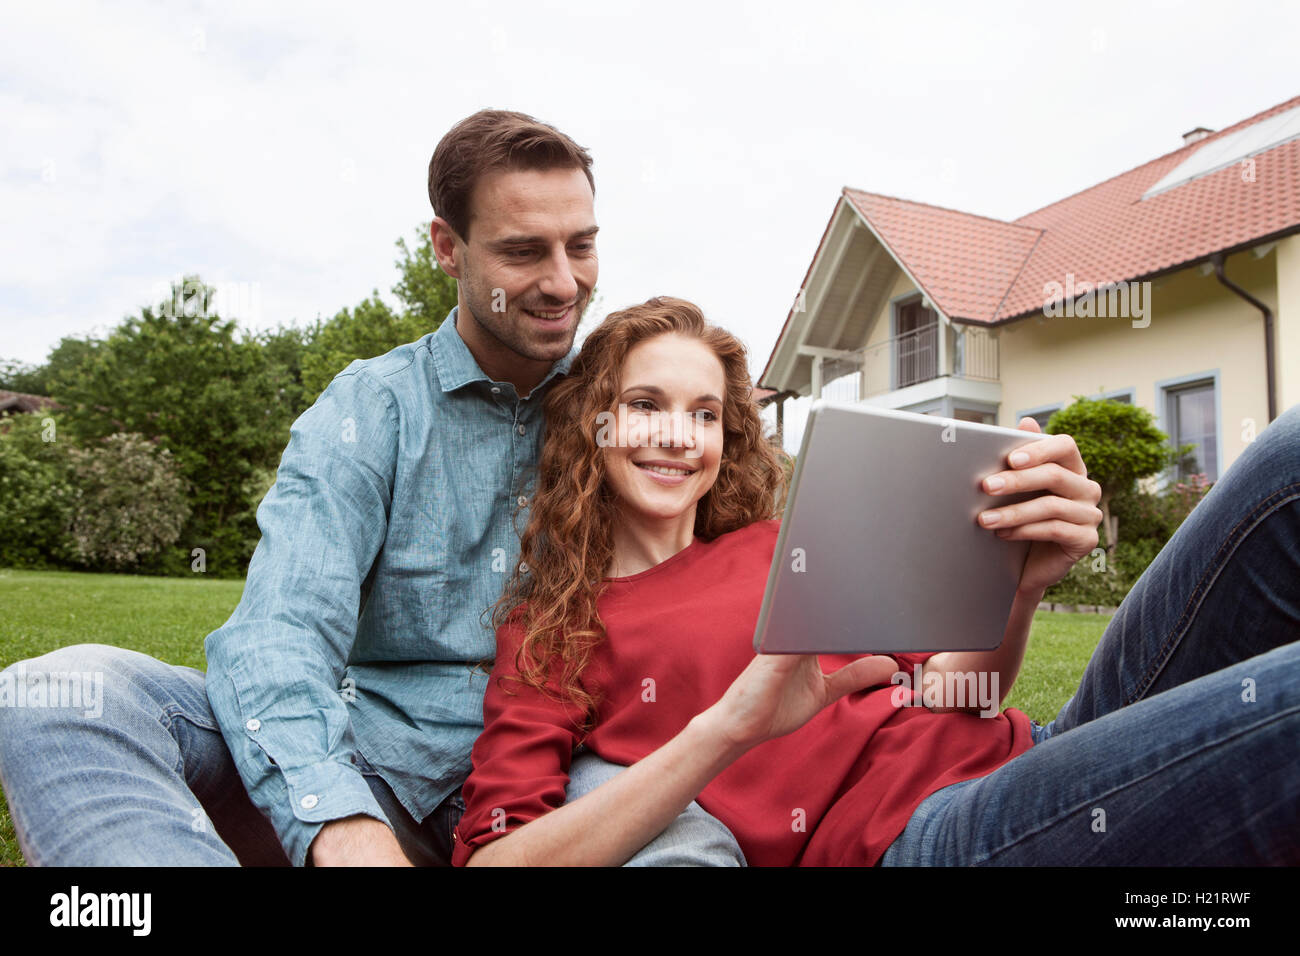 Smiling couple sitting in garden using tablet Stock Photo